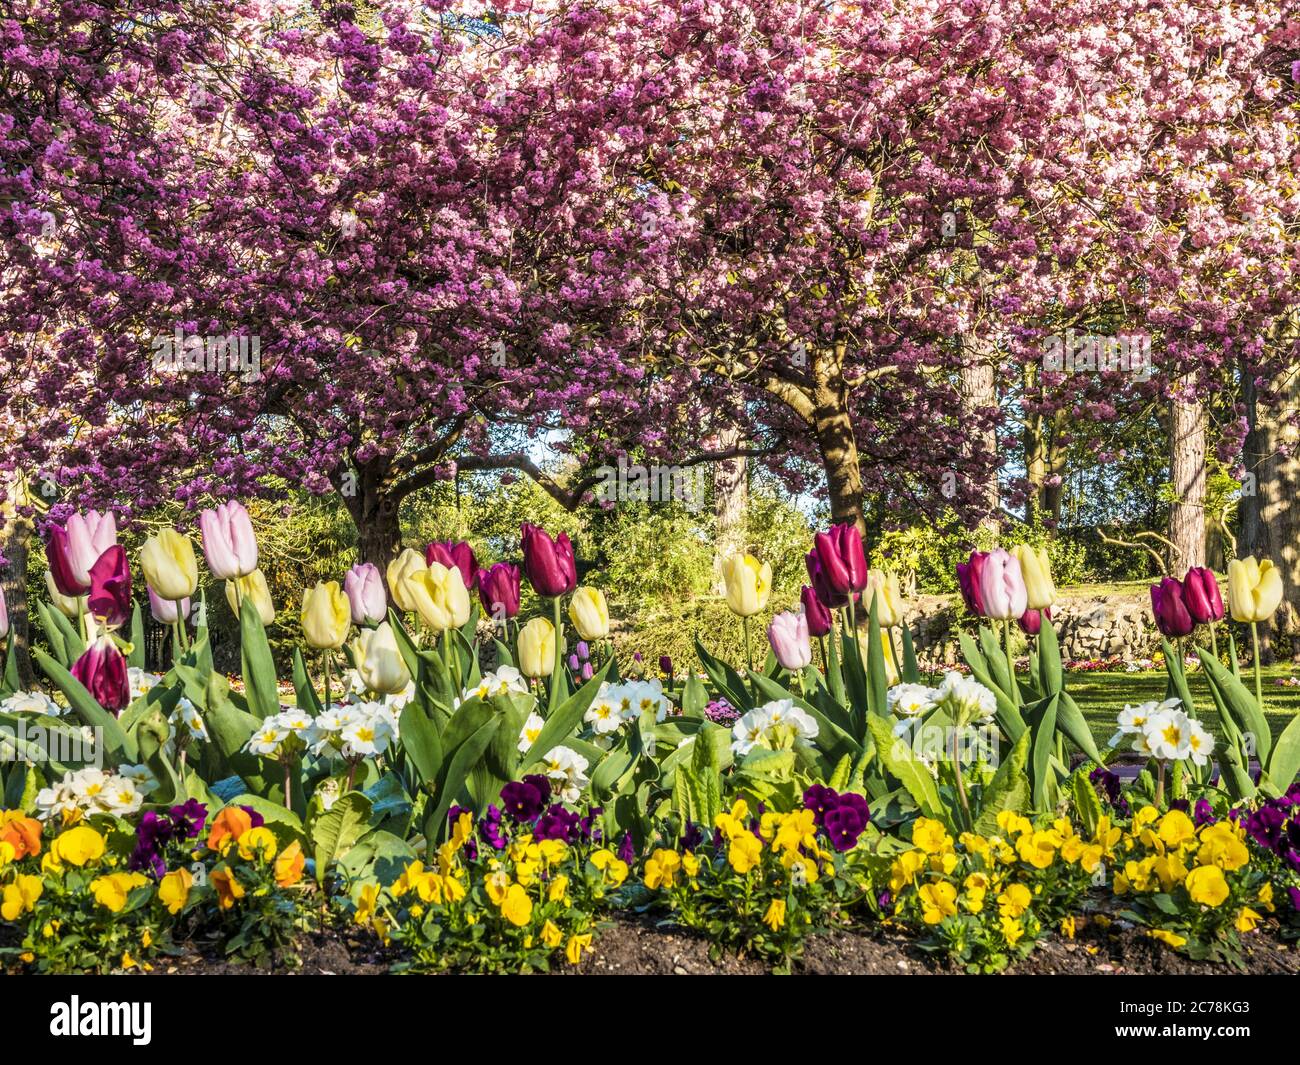 A bed of tulips, white primulas and pansies with flowering pink cherry trees in blossom in the background in an urban public park in England. Stock Photo